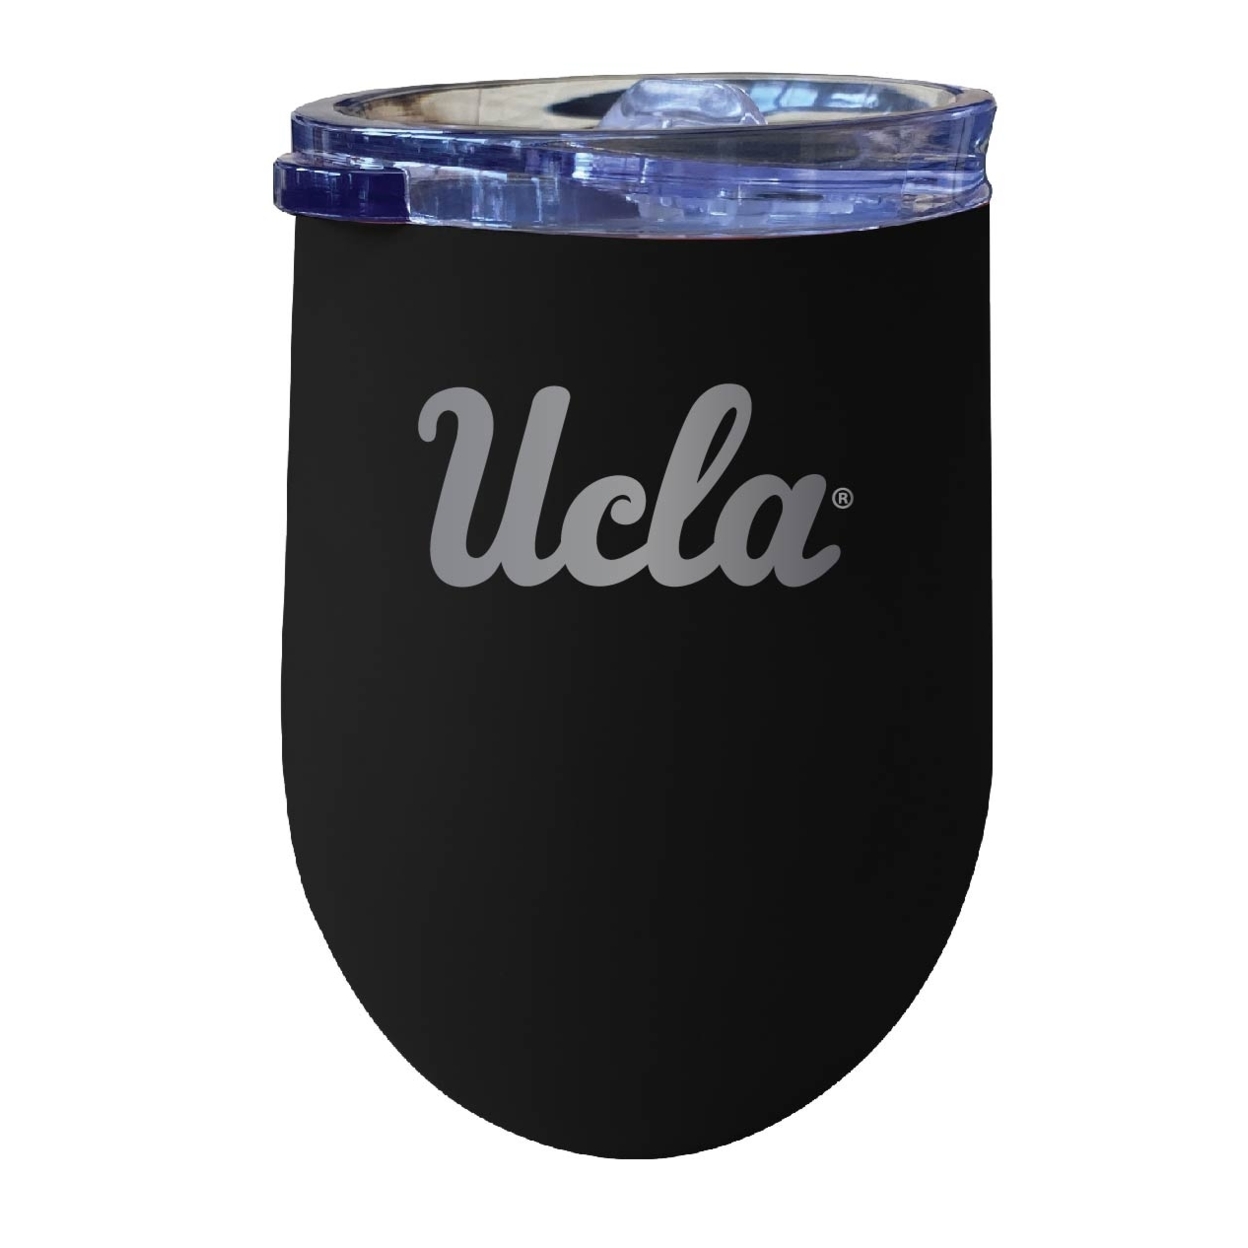 UCLA Bruins 12 Oz Etched Insulated Wine Stainless Steel Tumbler - Choose Your Color - Black